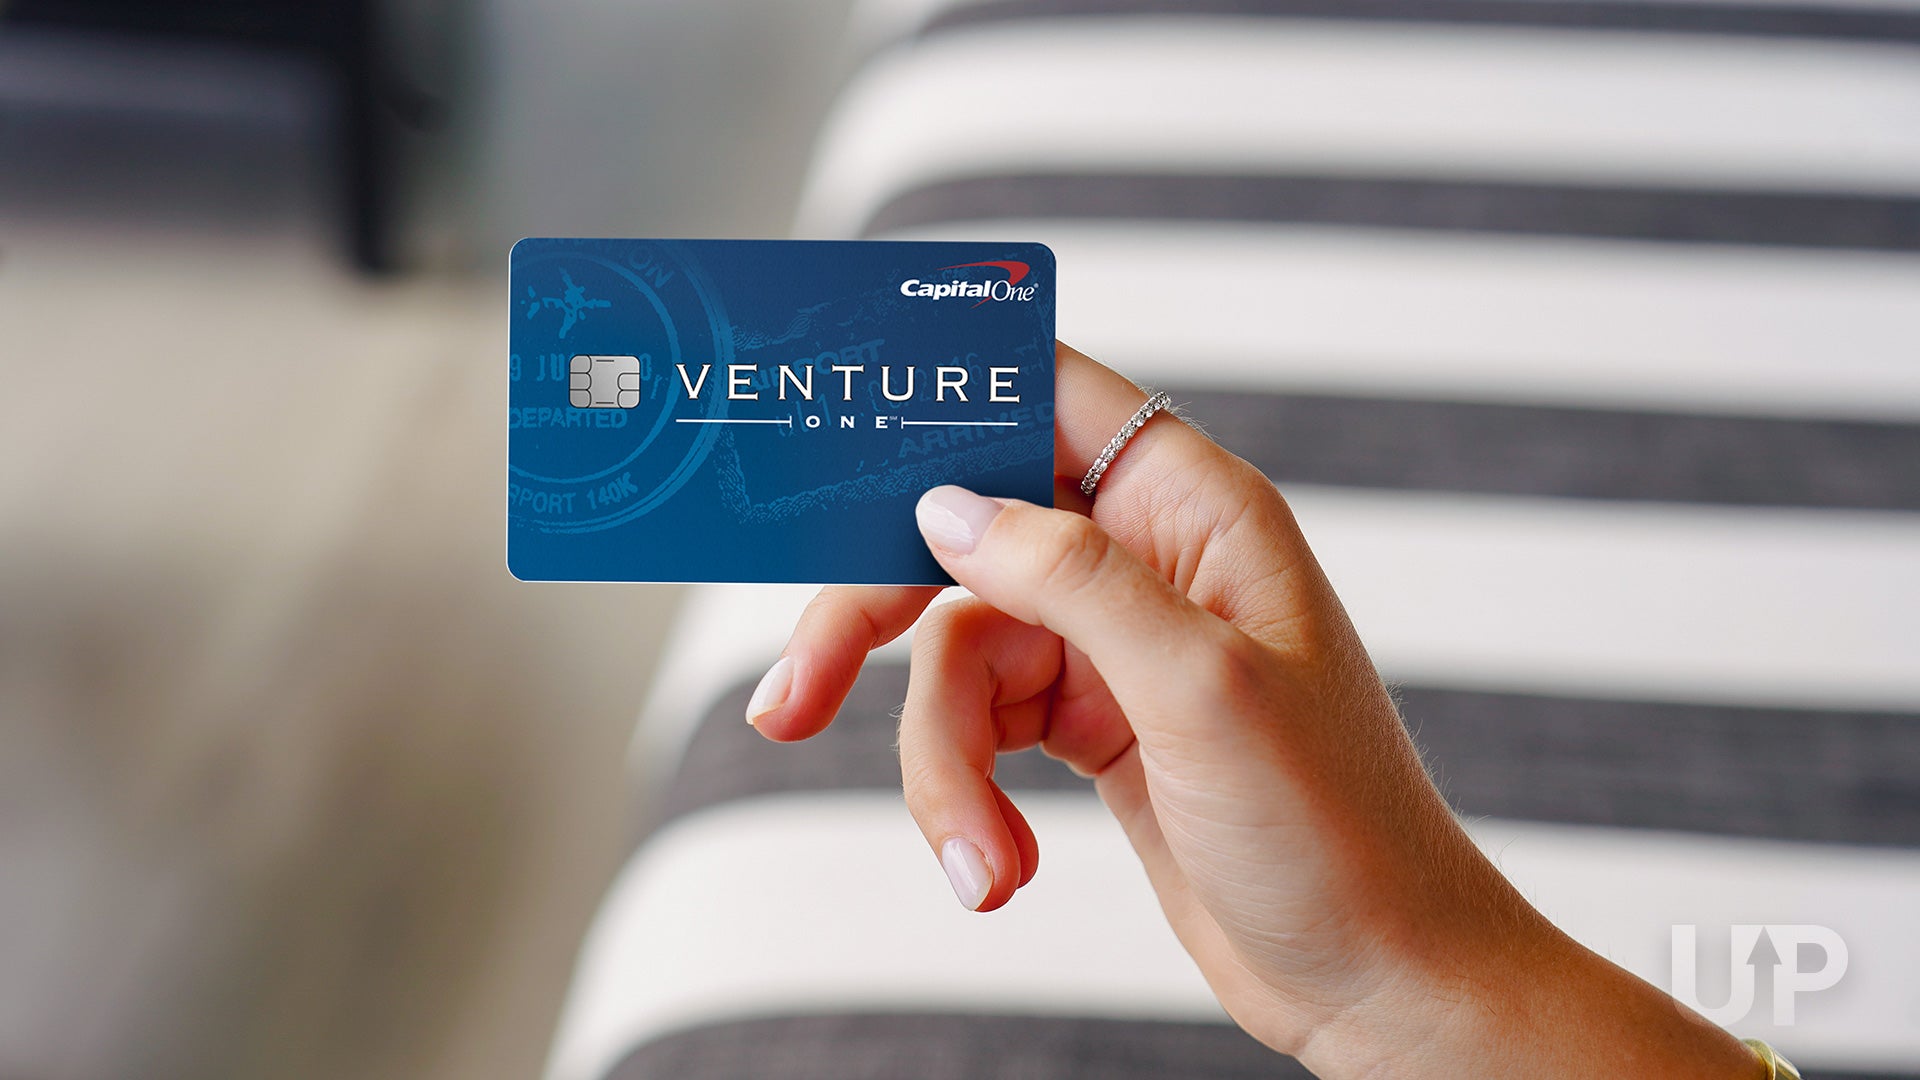 Capital One VentureOne Upgraded Points stripes